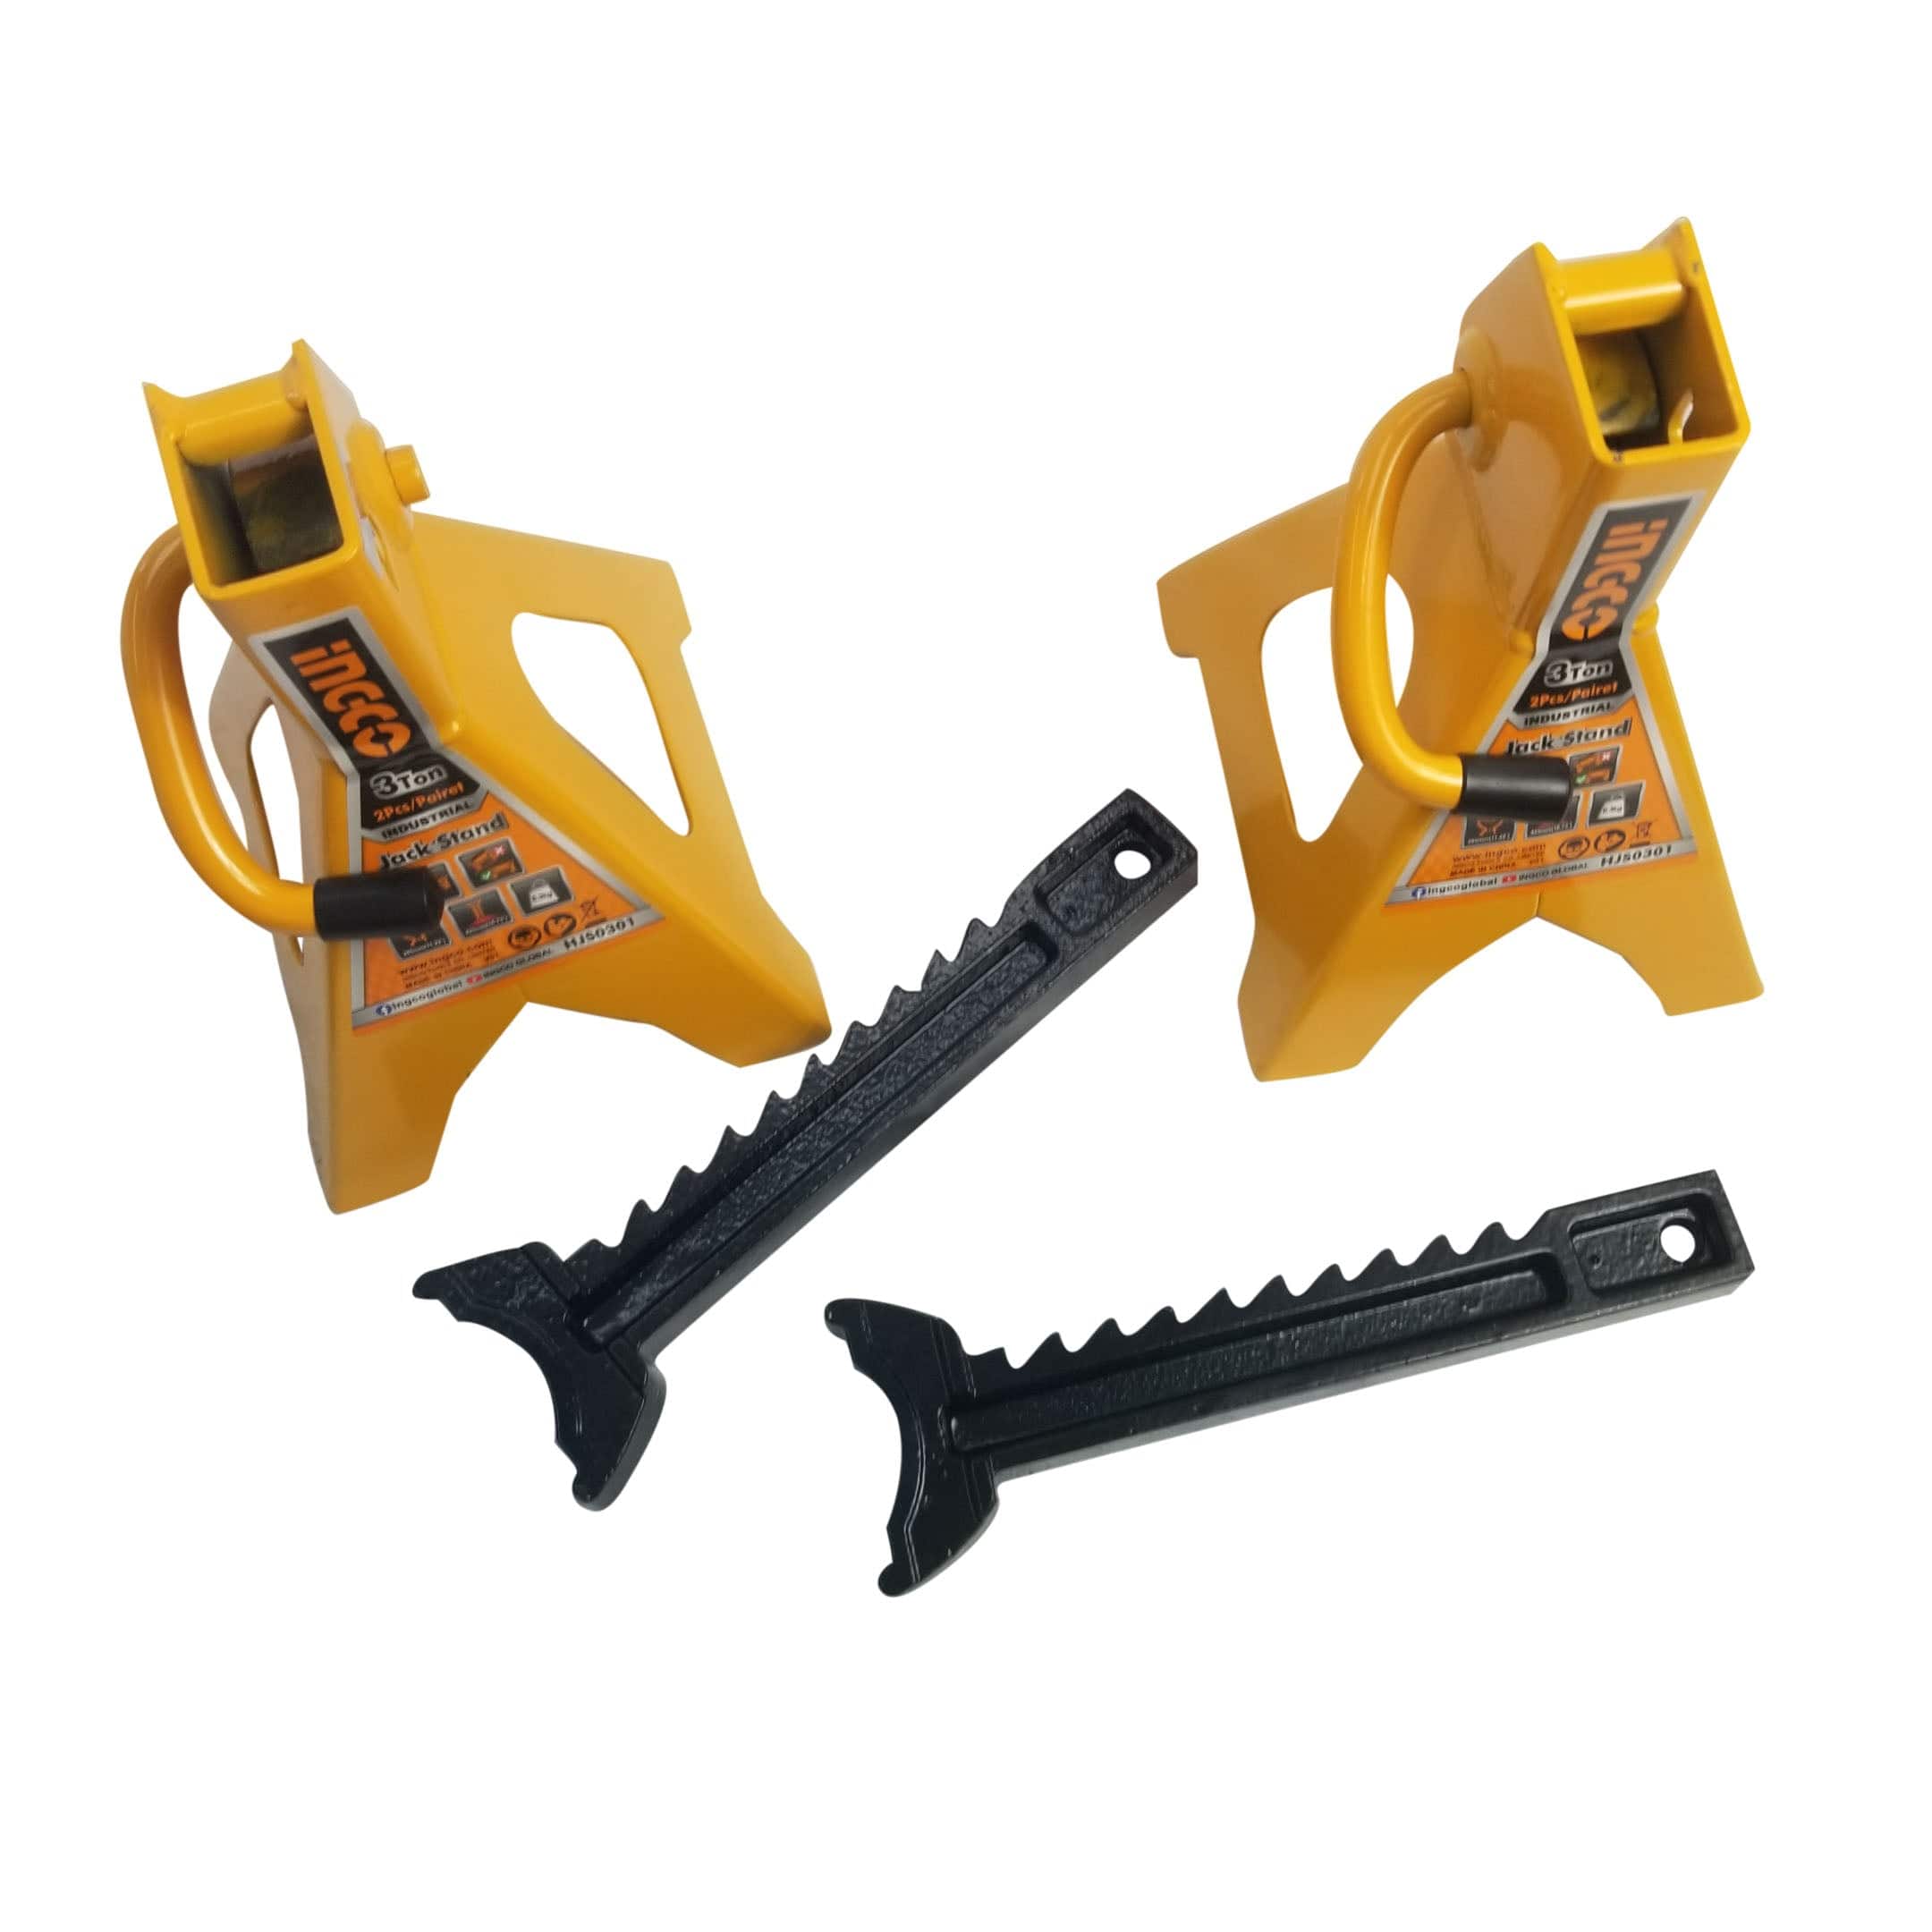 Towing and Lifting Equipment, Supply Master